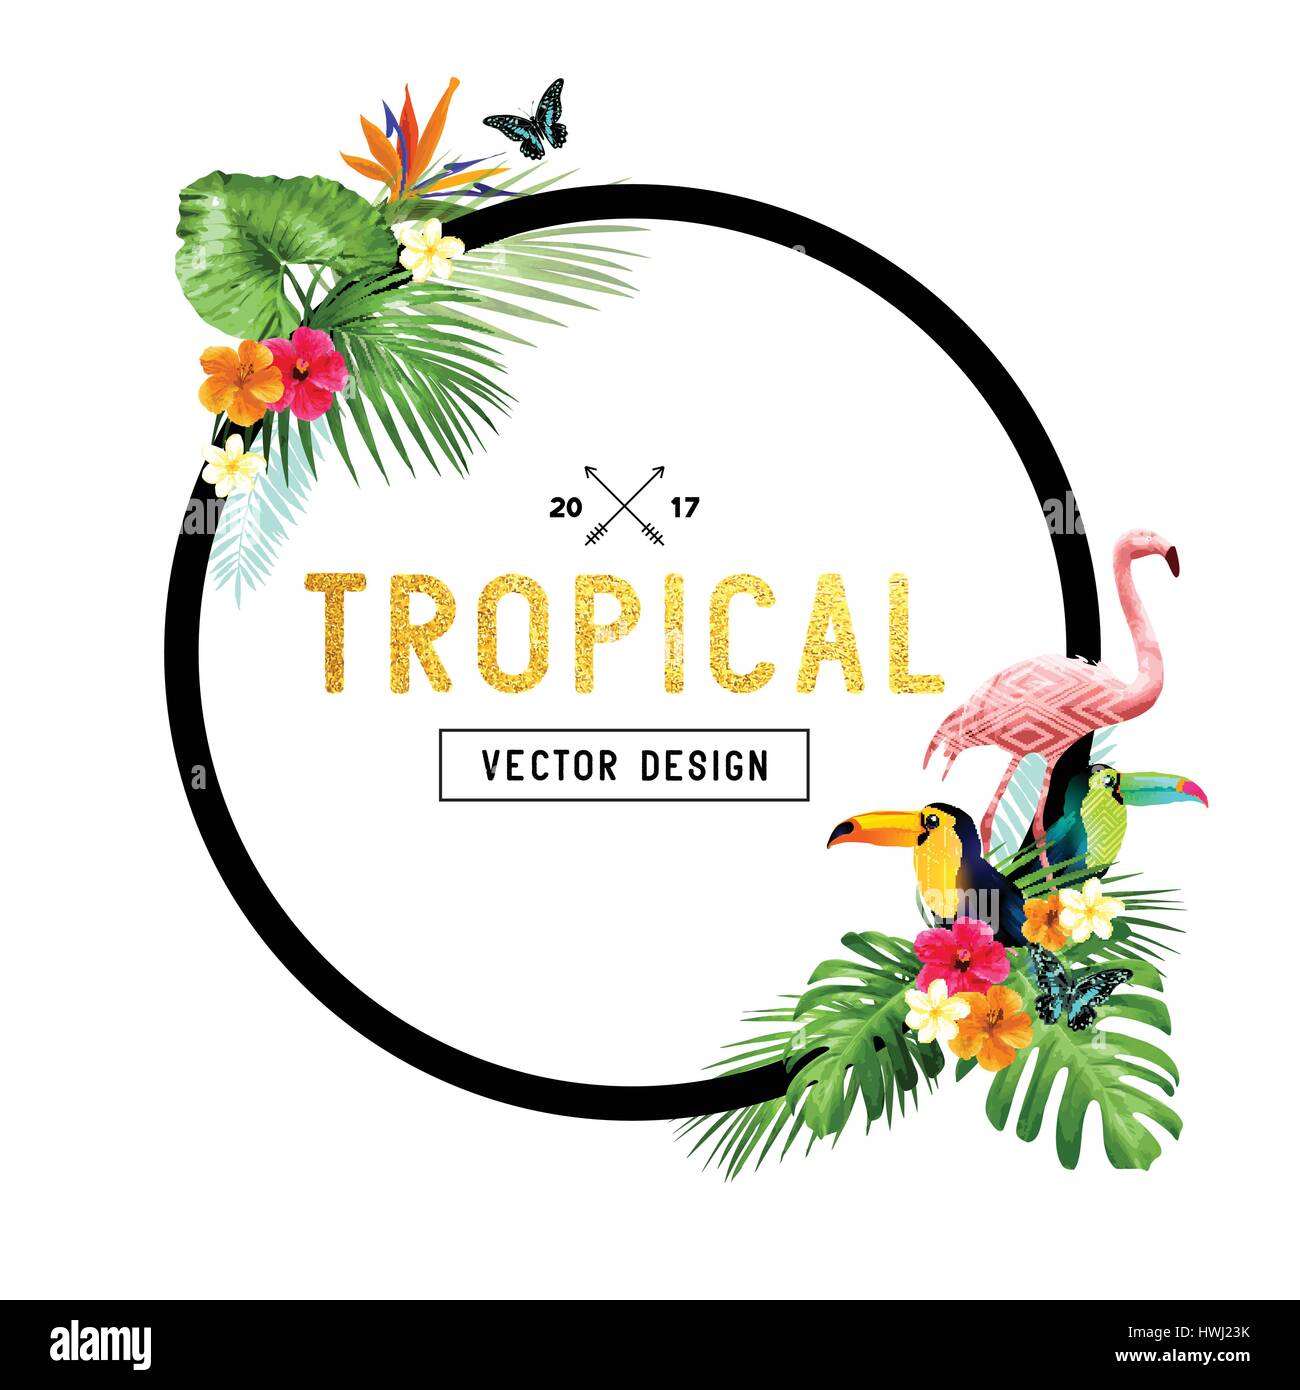 Colourful and vibrant tropical border design with flowers, palm leaves and birds. Vector illustration Stock Vector